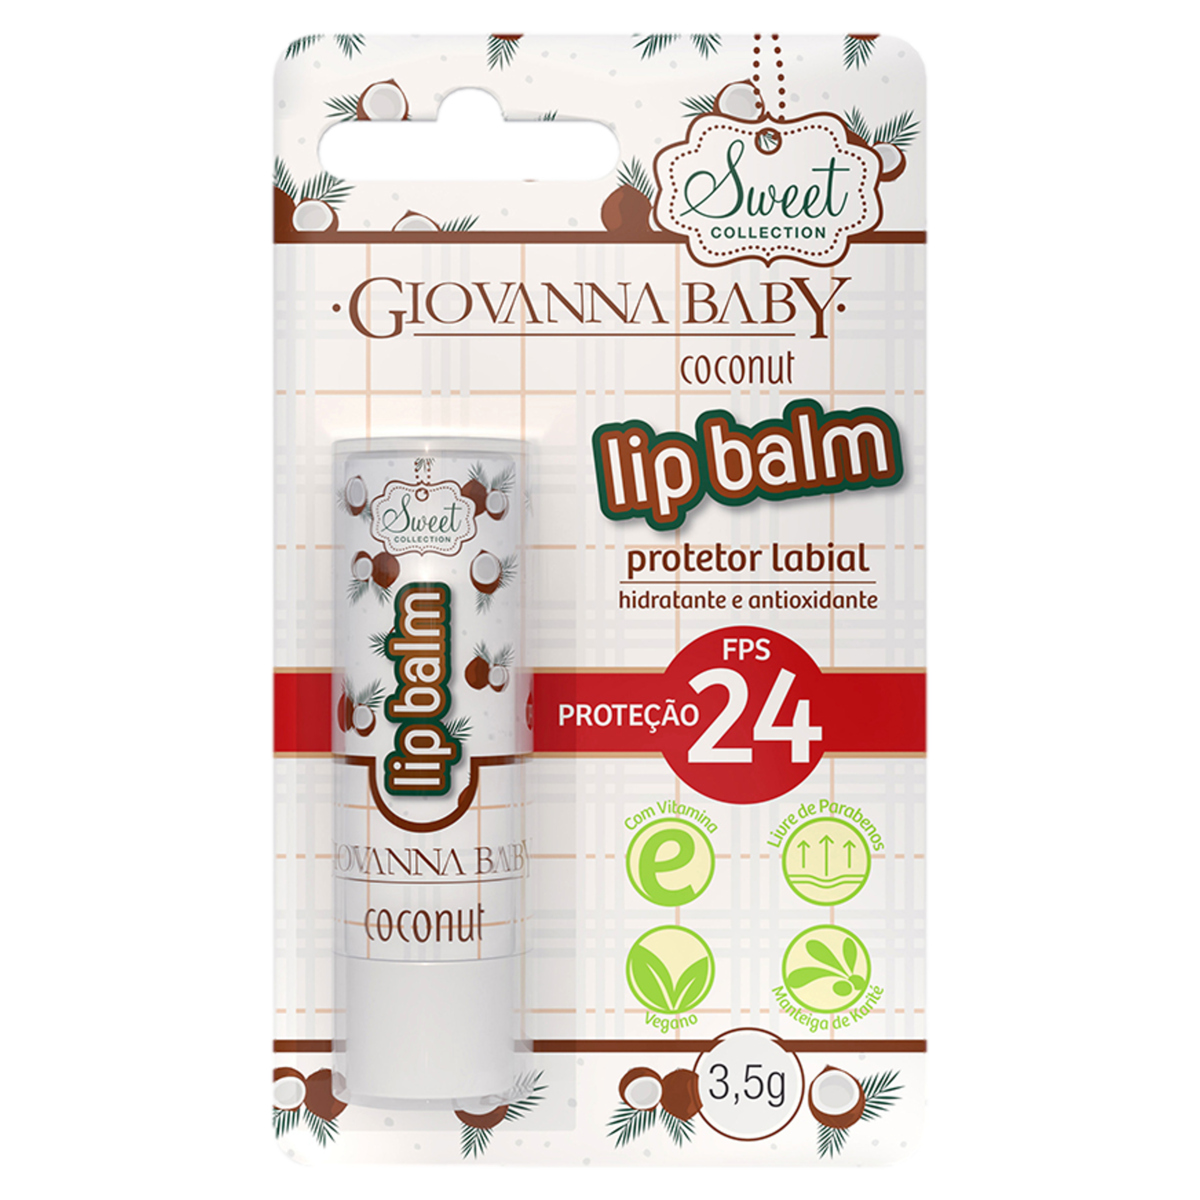 7896044900887 - PROTETOR LABIAL LIP BALM COCONUT FPS 24 GIOVANNA BABY SWEET COLLECTION BLISTER 3,5G